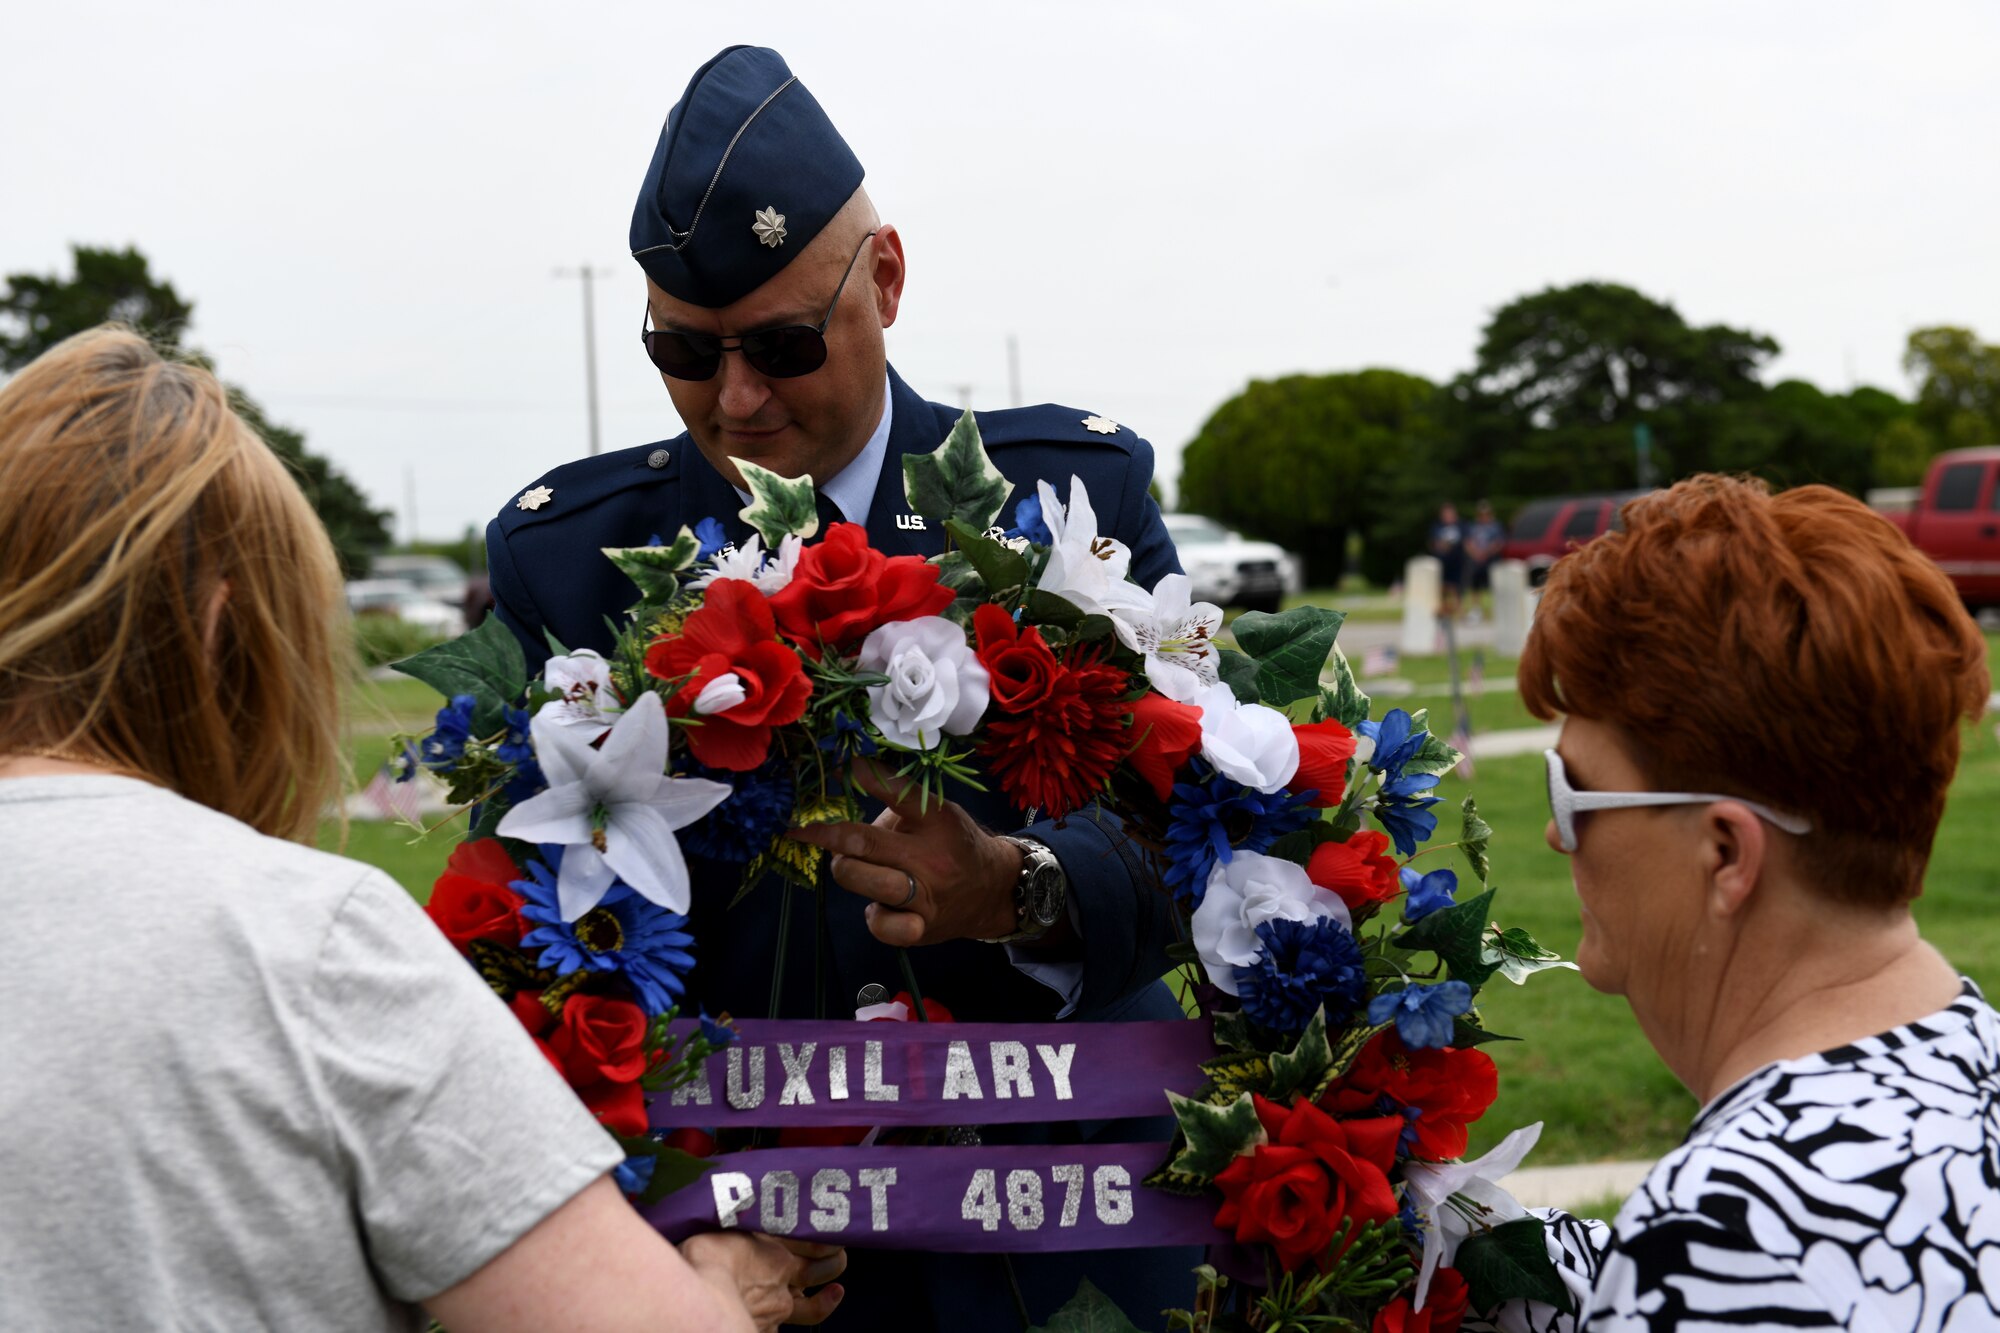 Lt. Col. Justin Capper, commander of the 54th Air Refueling Squadron, picks up a wreath with several community members to place it before a memorial tombstone on Memorial Day, May 27, 2019, at Altus, Okla. This was part of a ceremony honoring fallen service members.